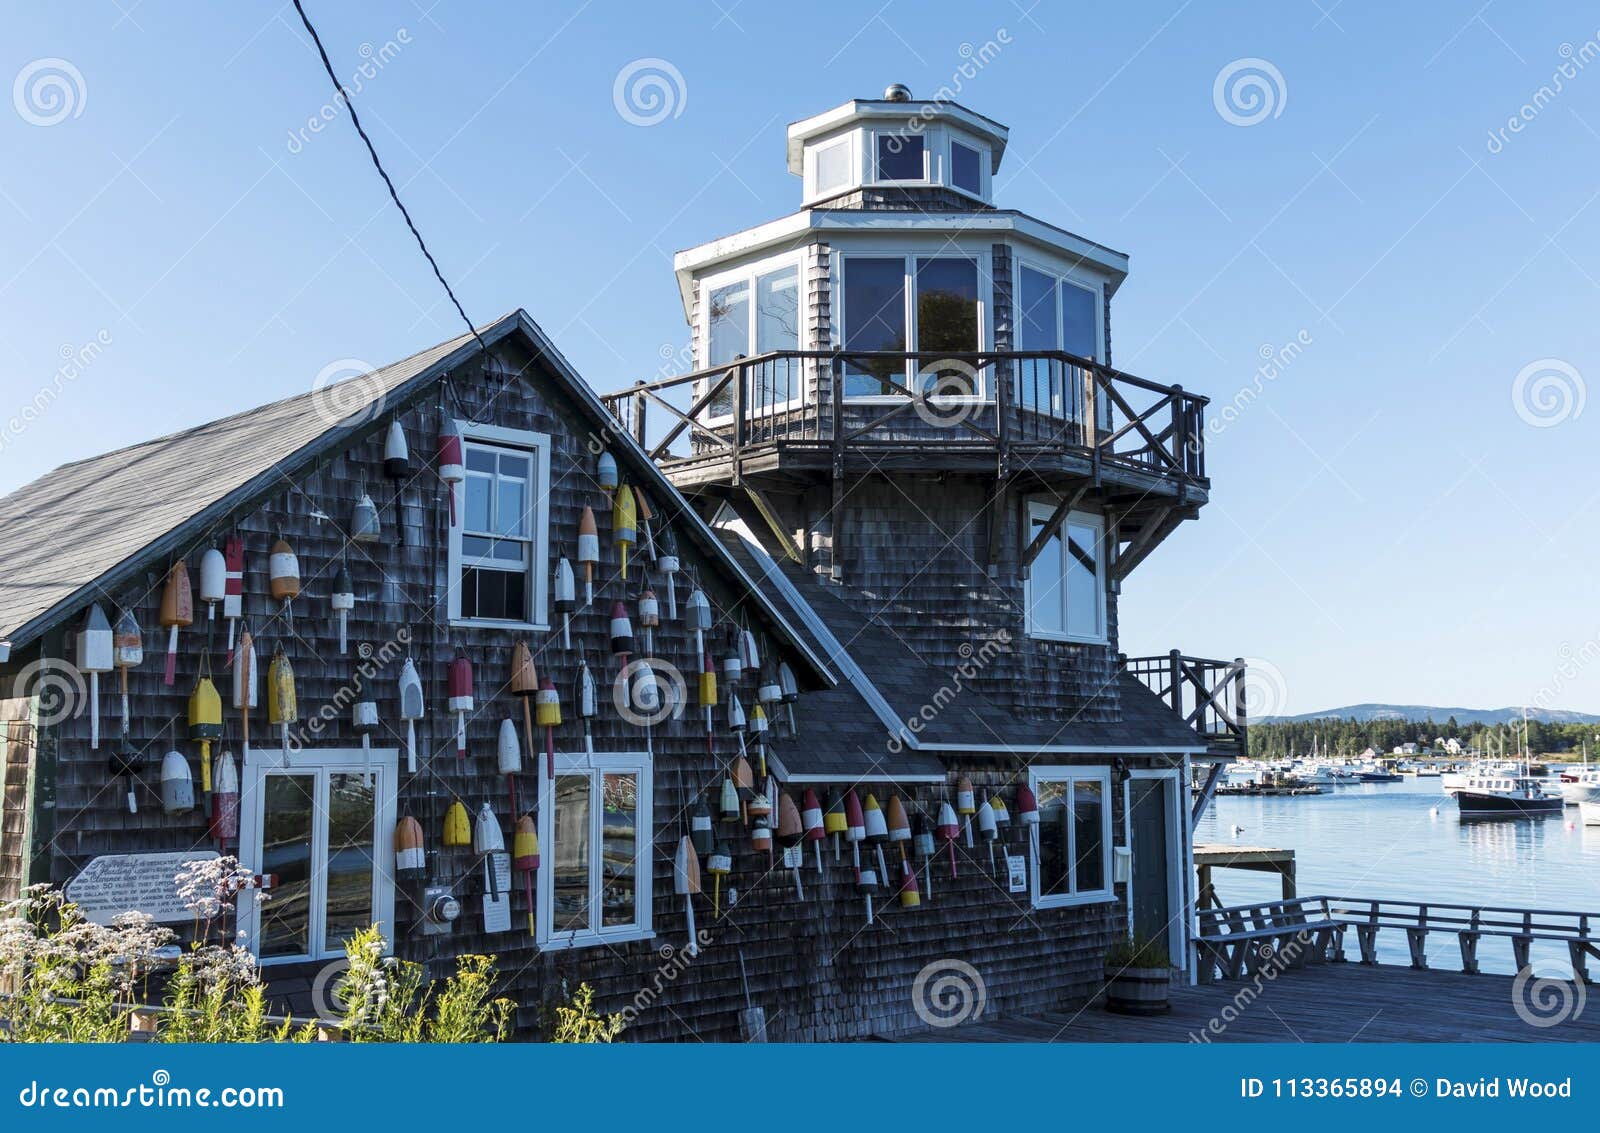 Lobster Buoys on the Clarence Harding House in Maine Editorial